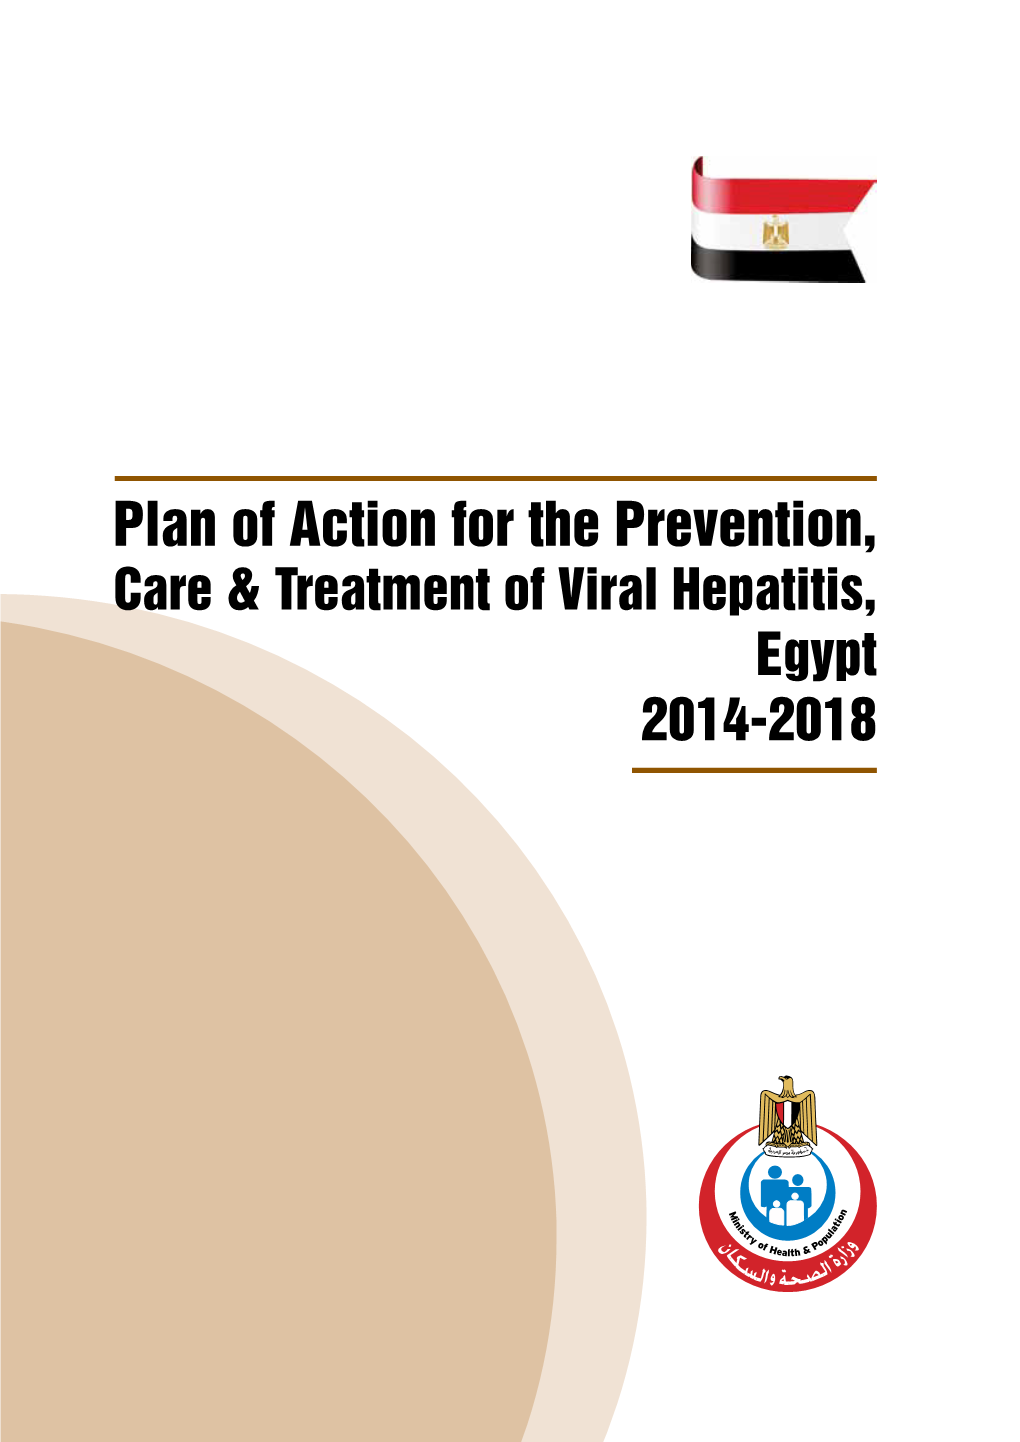 Plan of Action for the Prevention, Care & Treatment of Viral Hepatitis